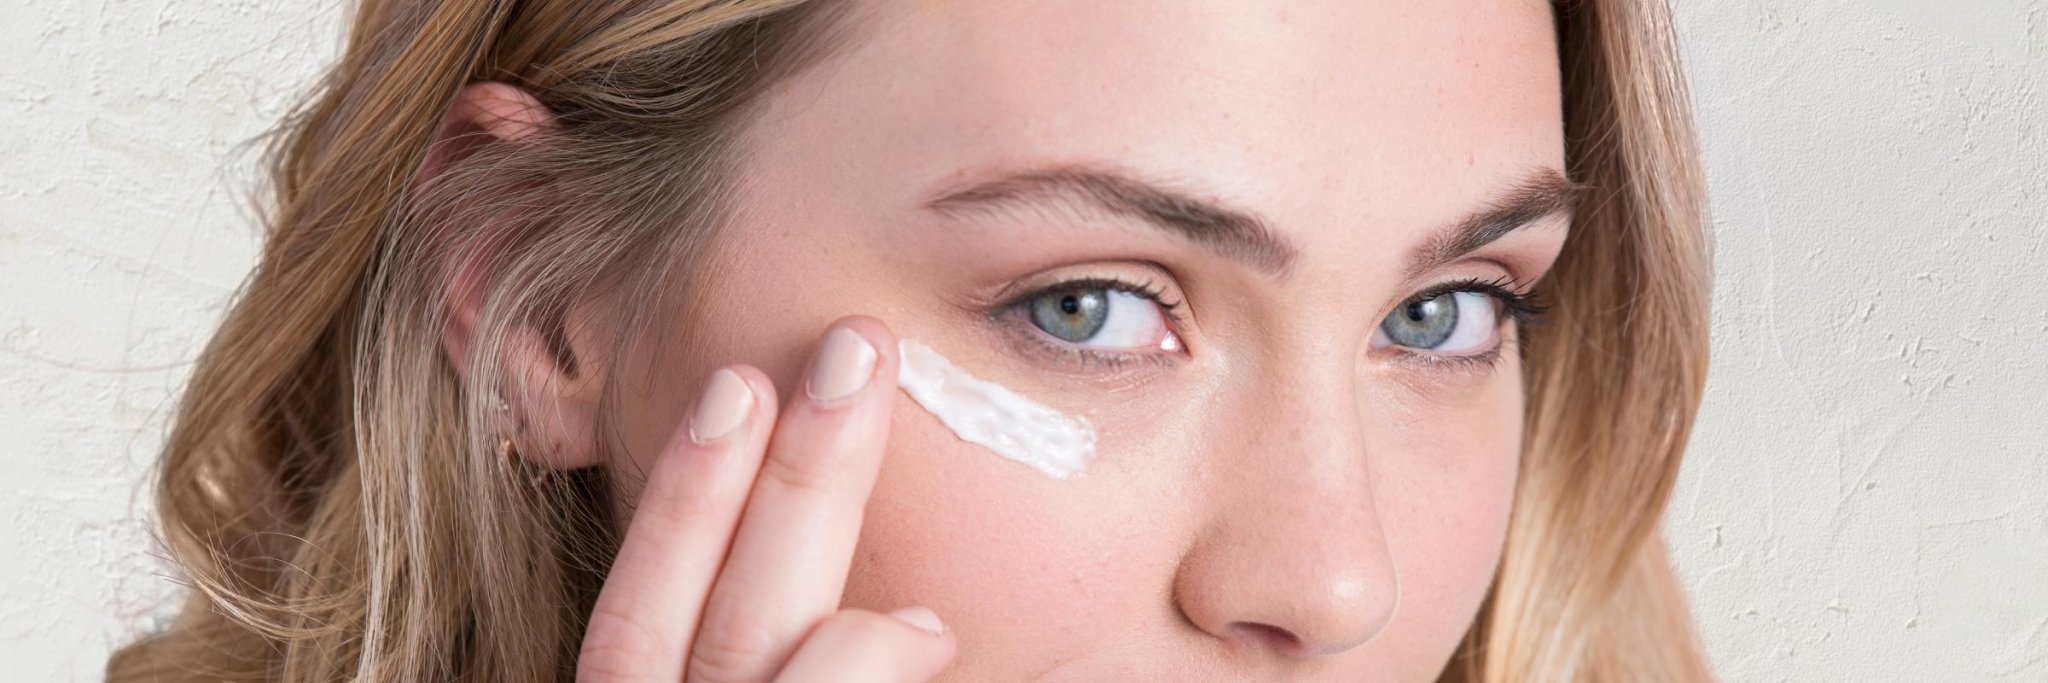 How to Reduce Puffy Eyes: Tips and Effective Treatments